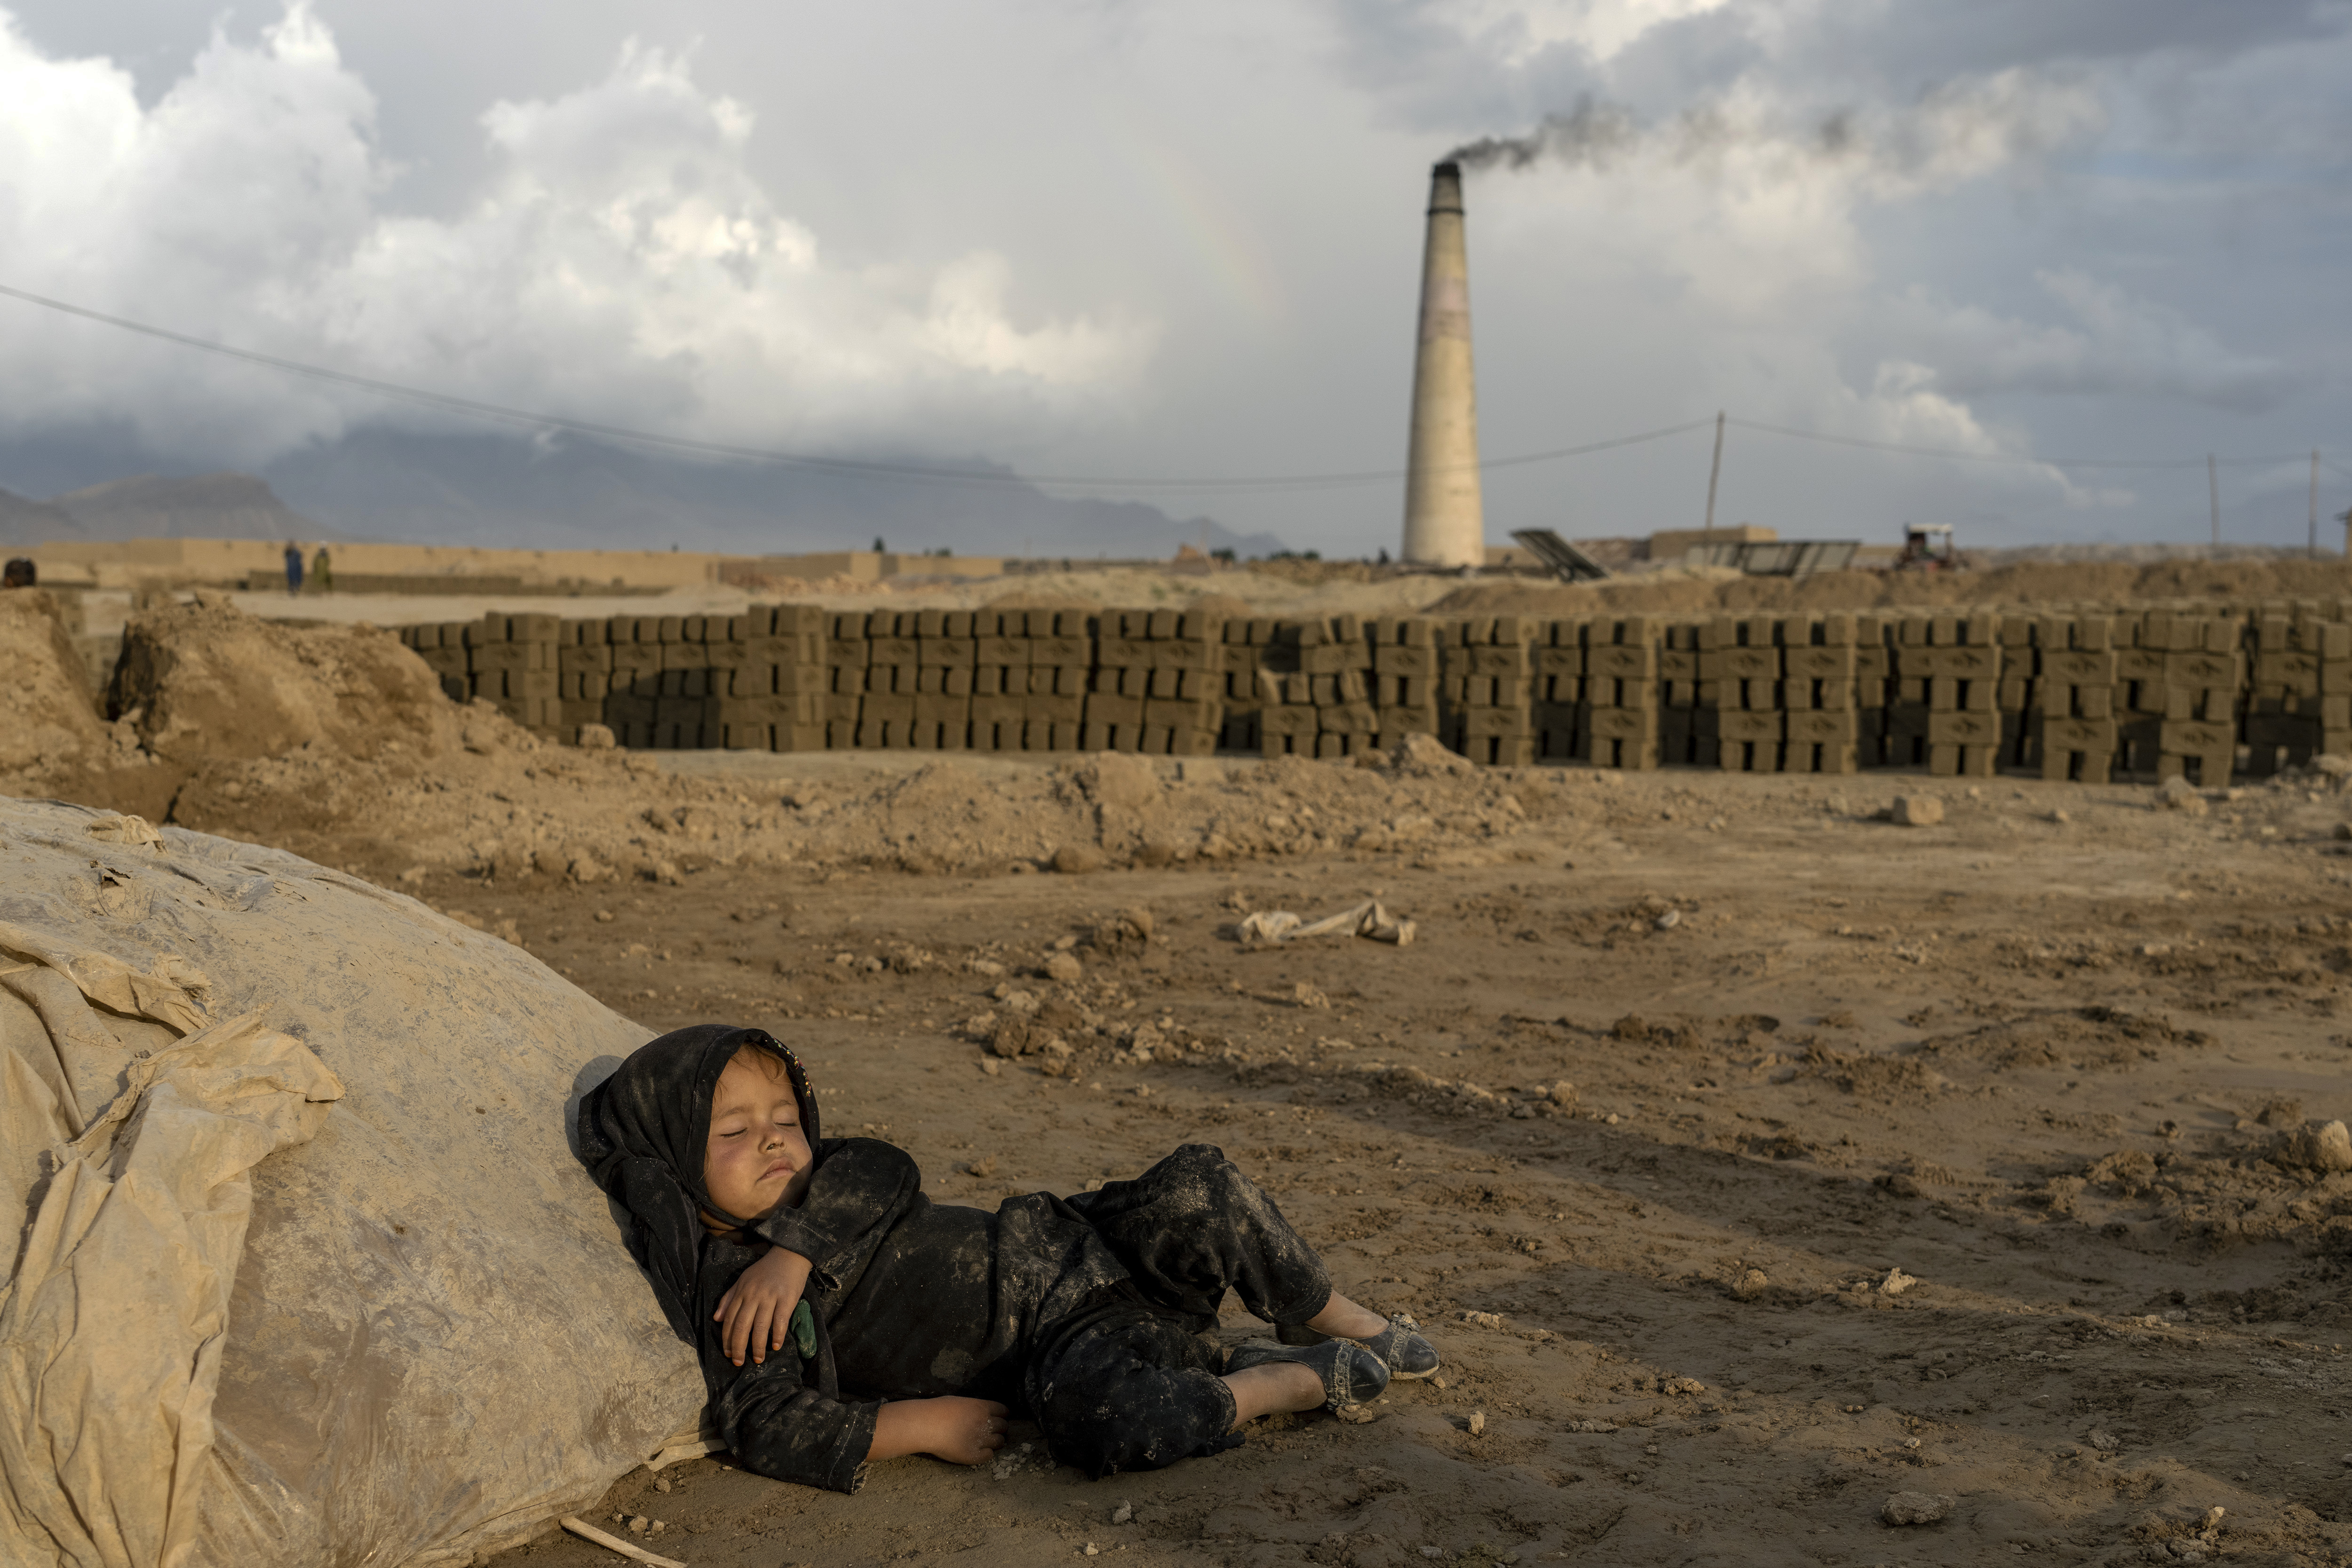 A 4-year-old Afghan girl sleeps after working at a brick factory on the outskirts of Kabul.